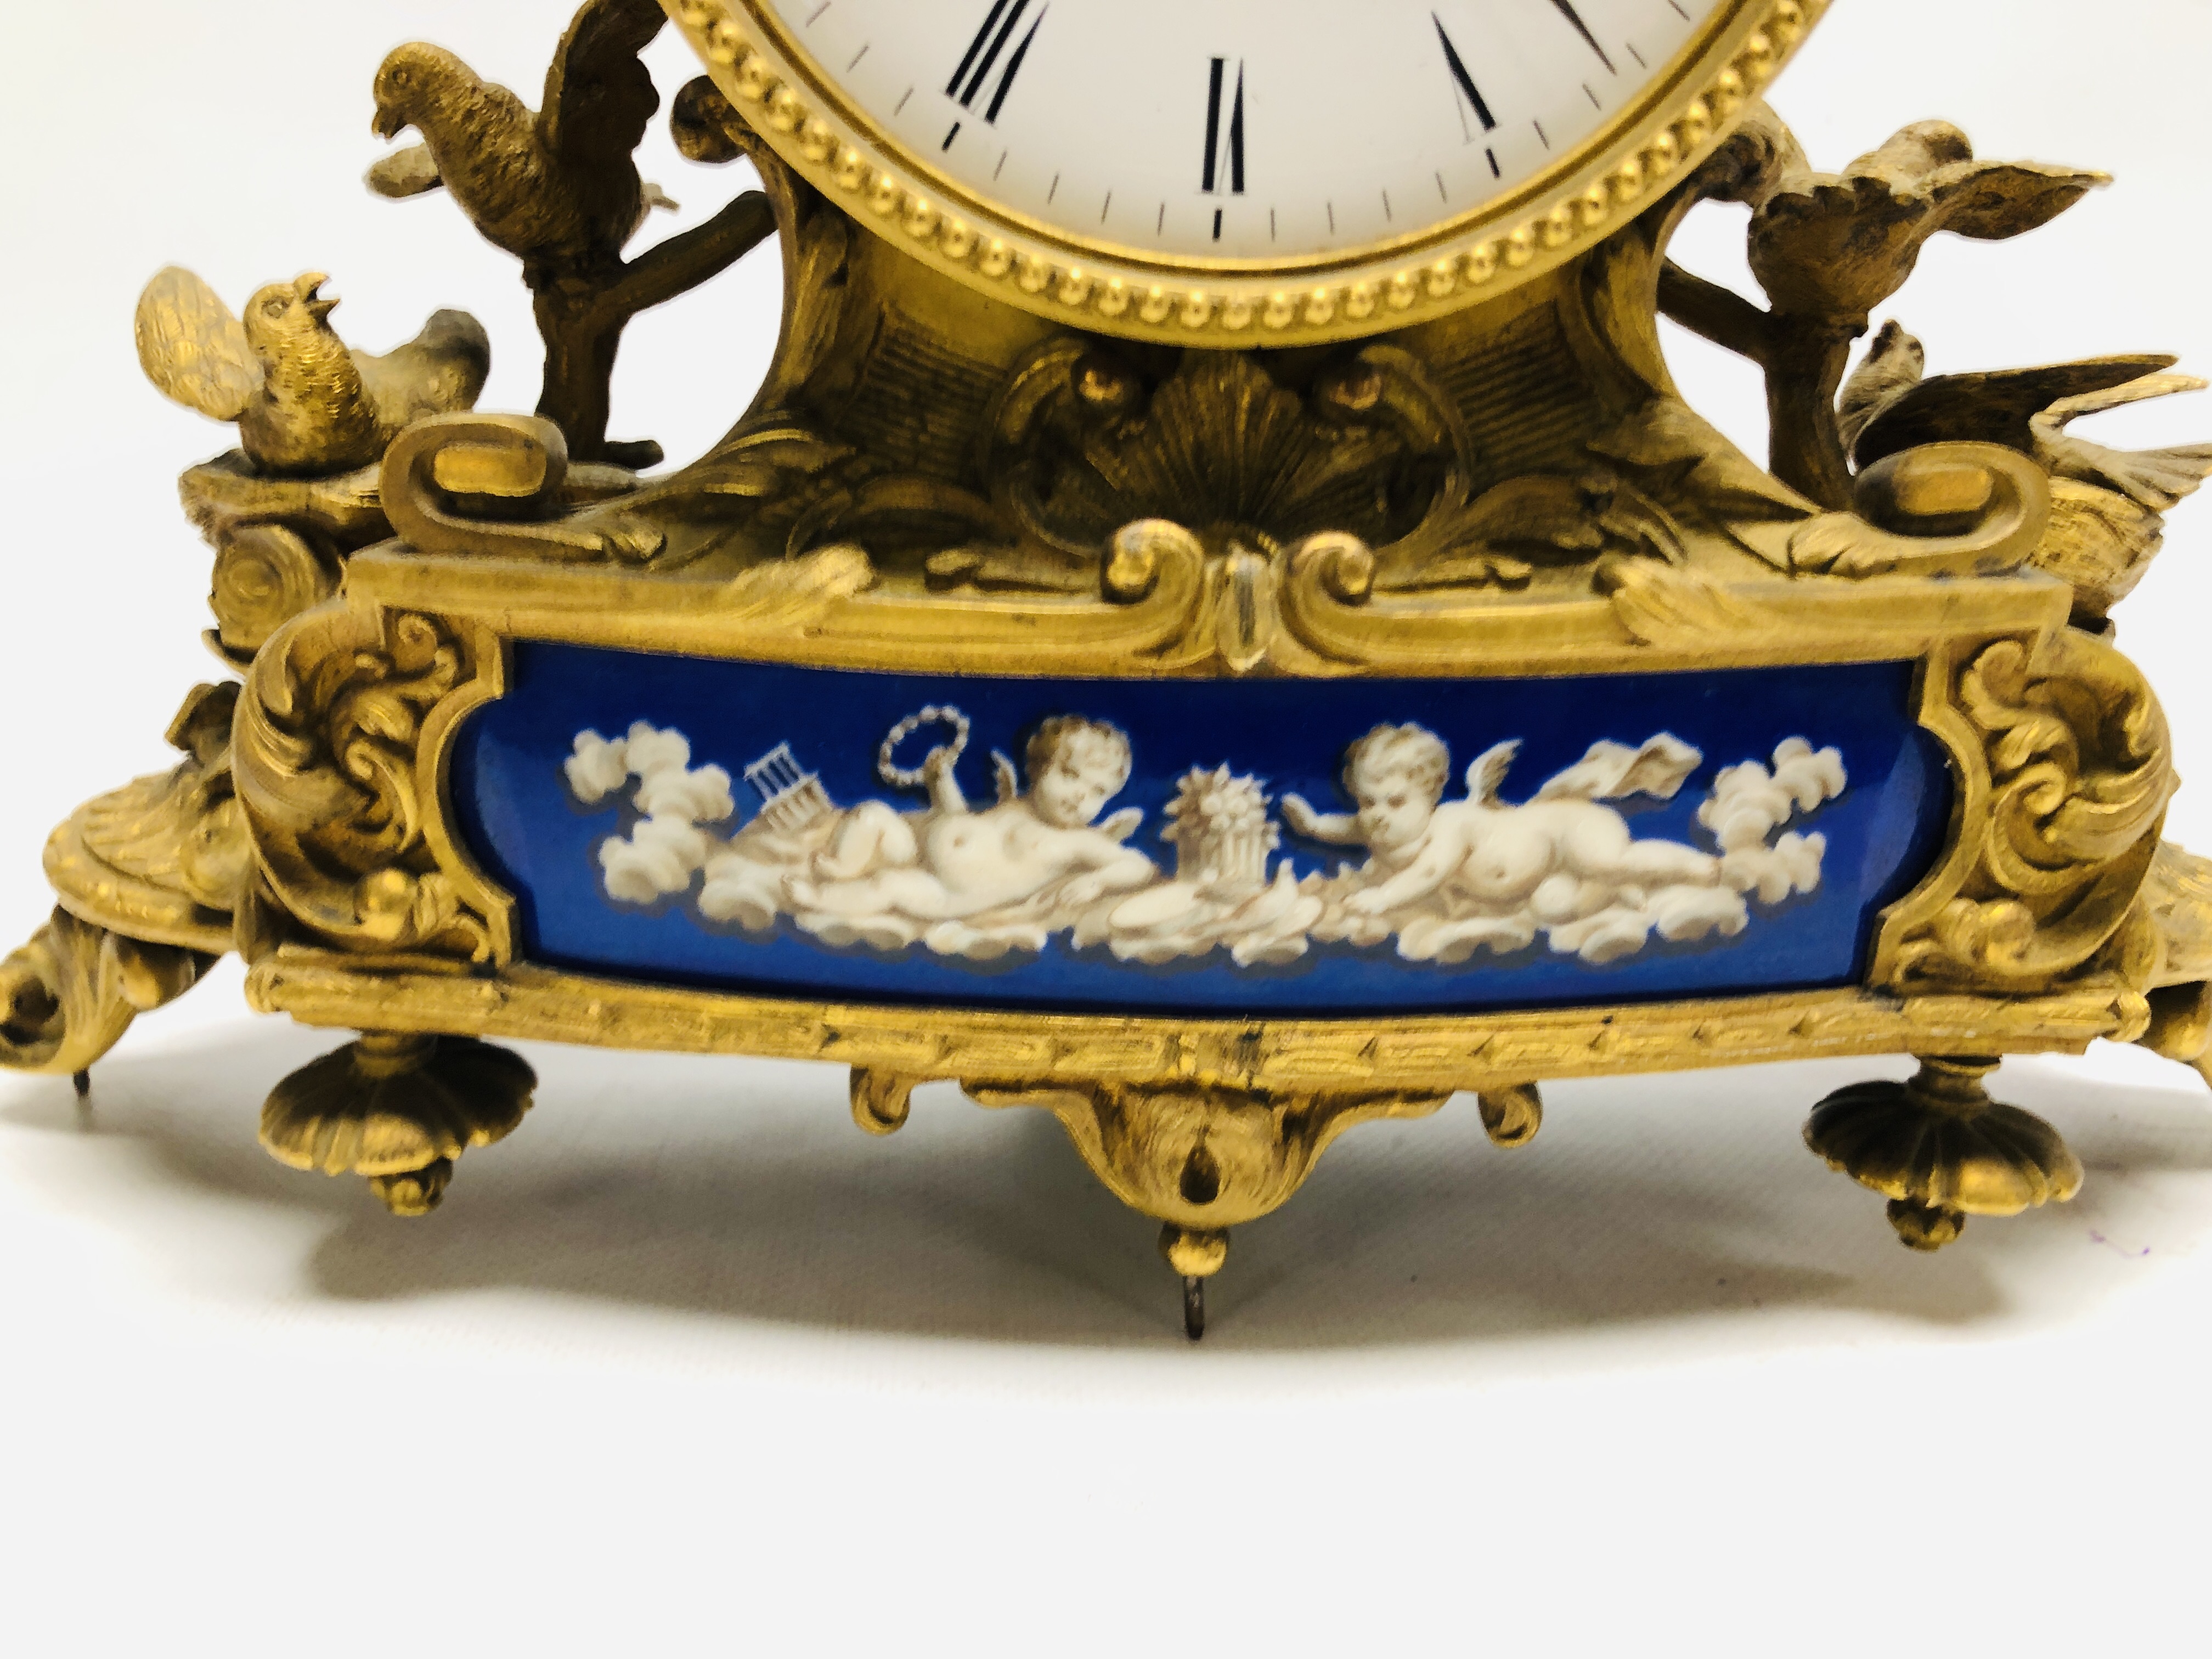 AN ORNATE BRASS MANTEL CLOCK WITH ENAMELLED CHERUB DETAILED PANEL AND NESTING BIRDS STANDING ON A - Image 6 of 15